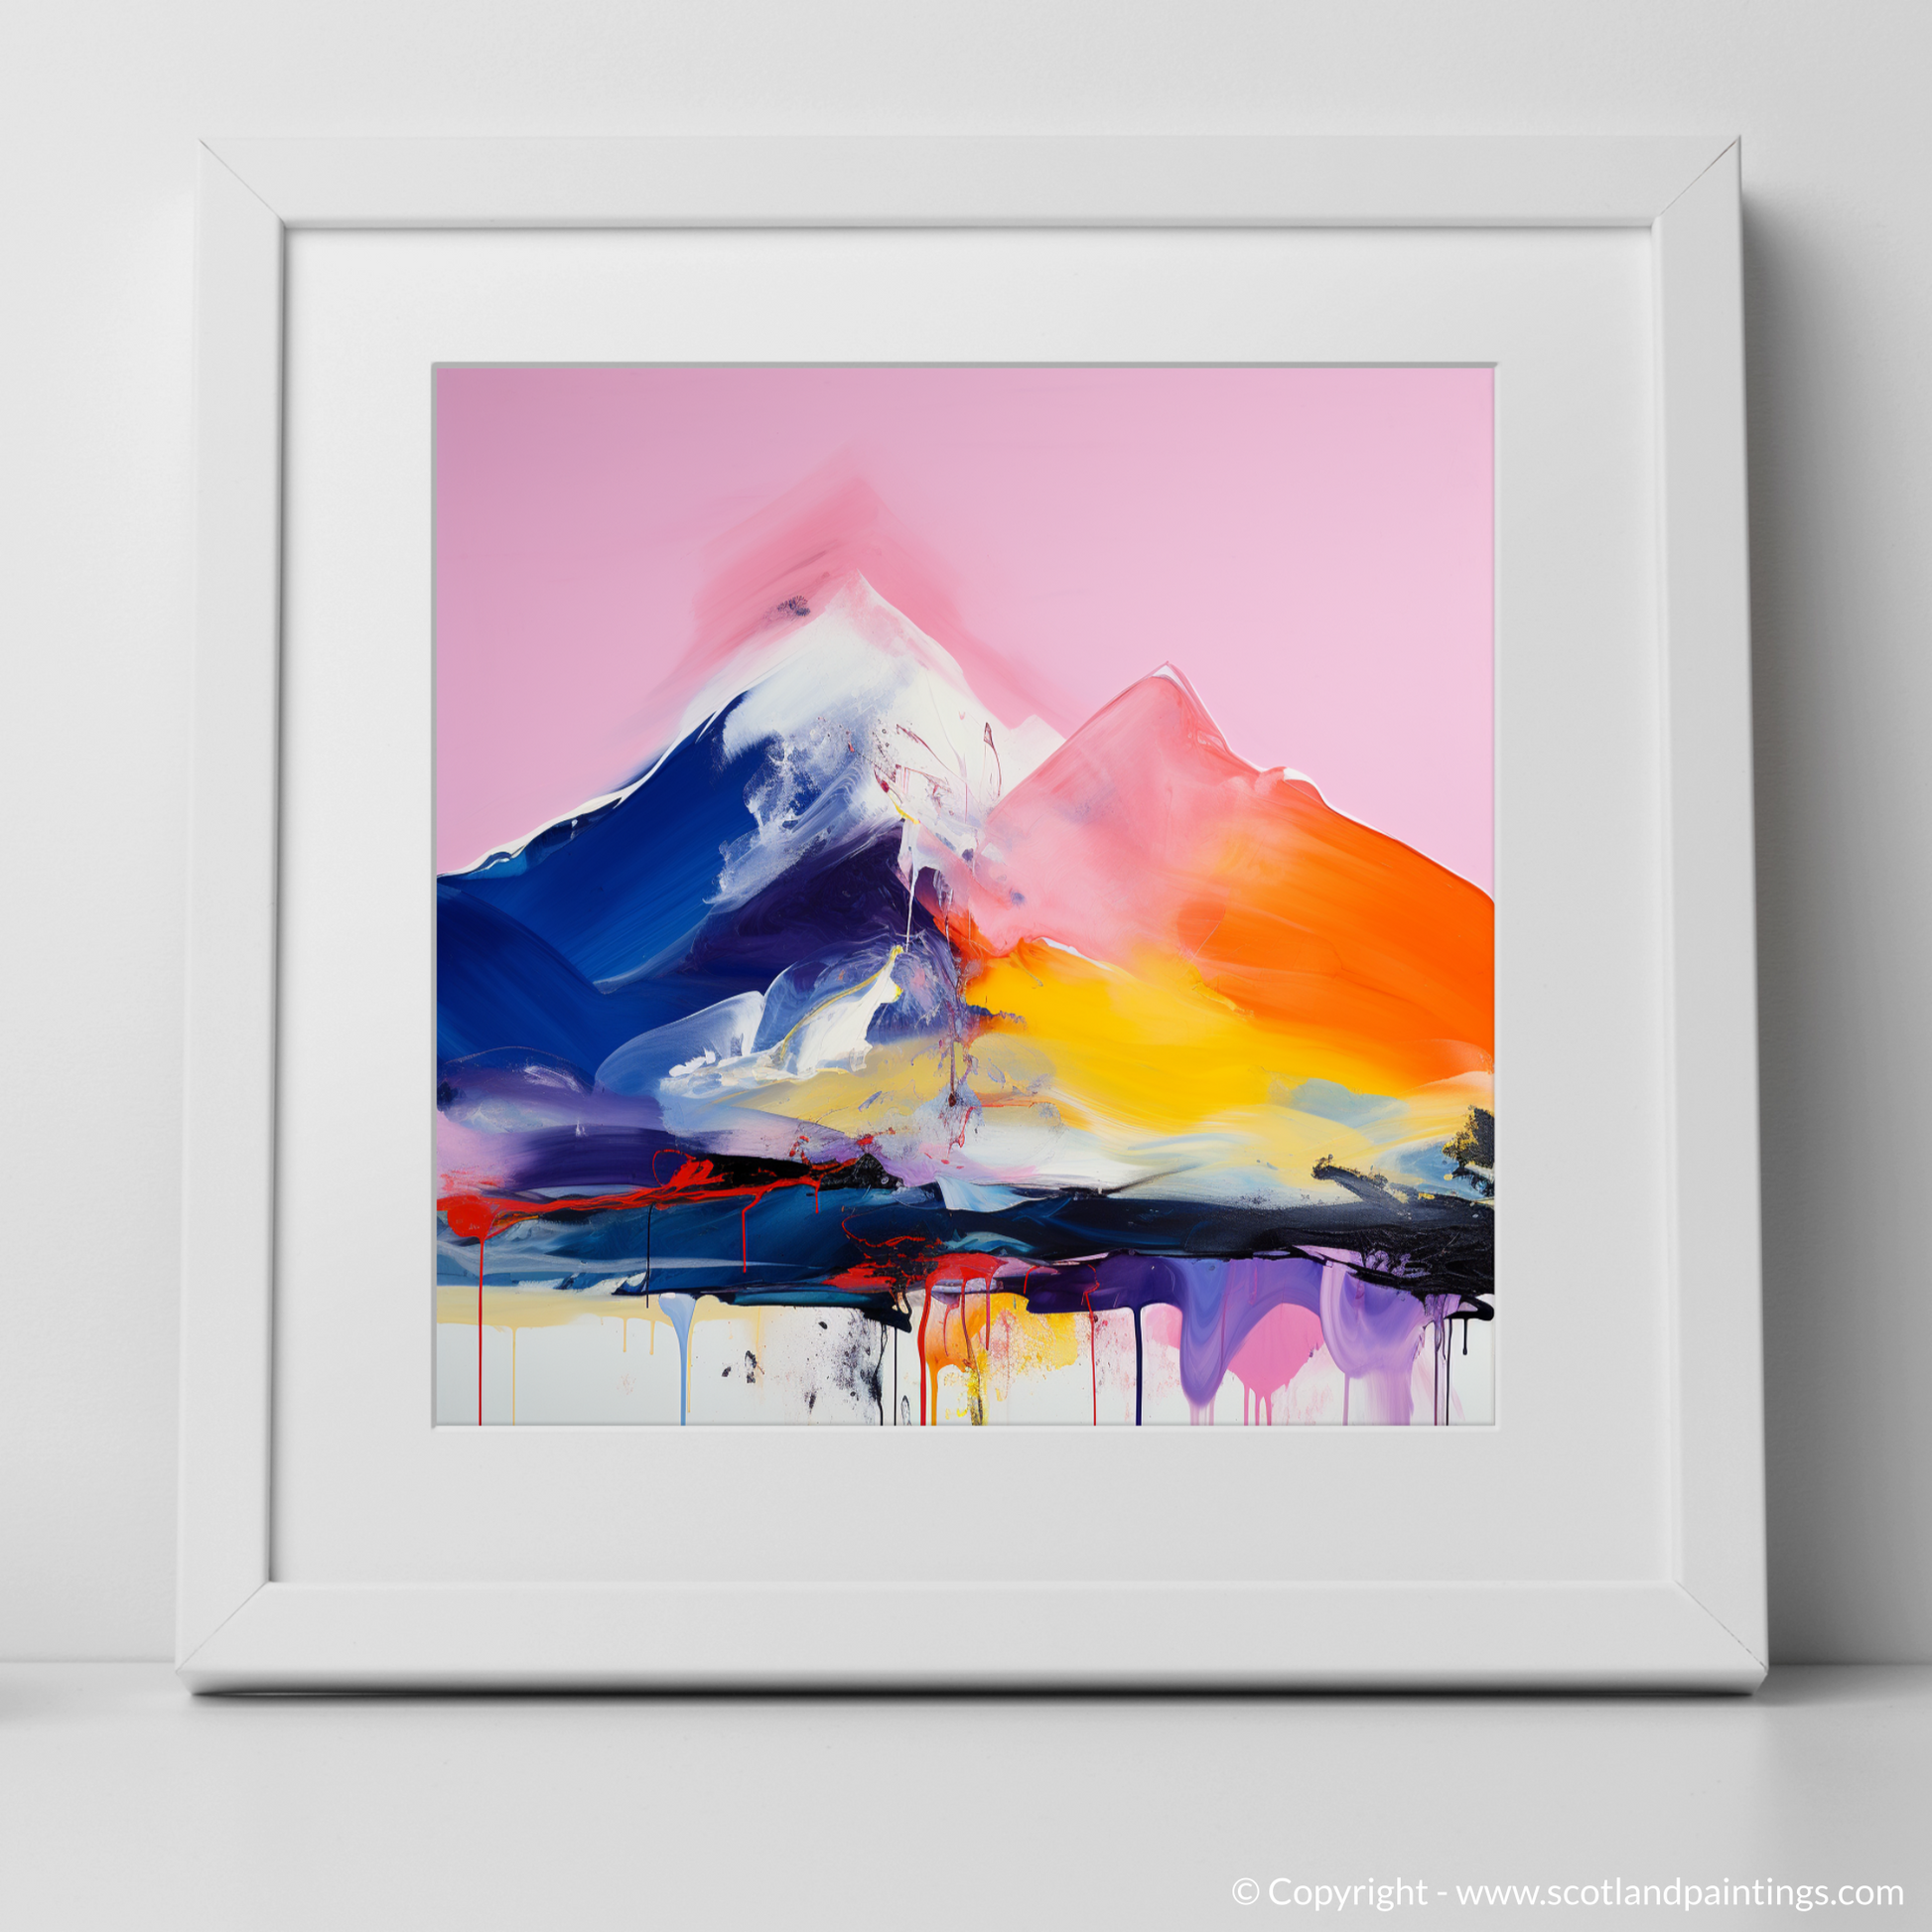 Art Print of Ben More with a white frame